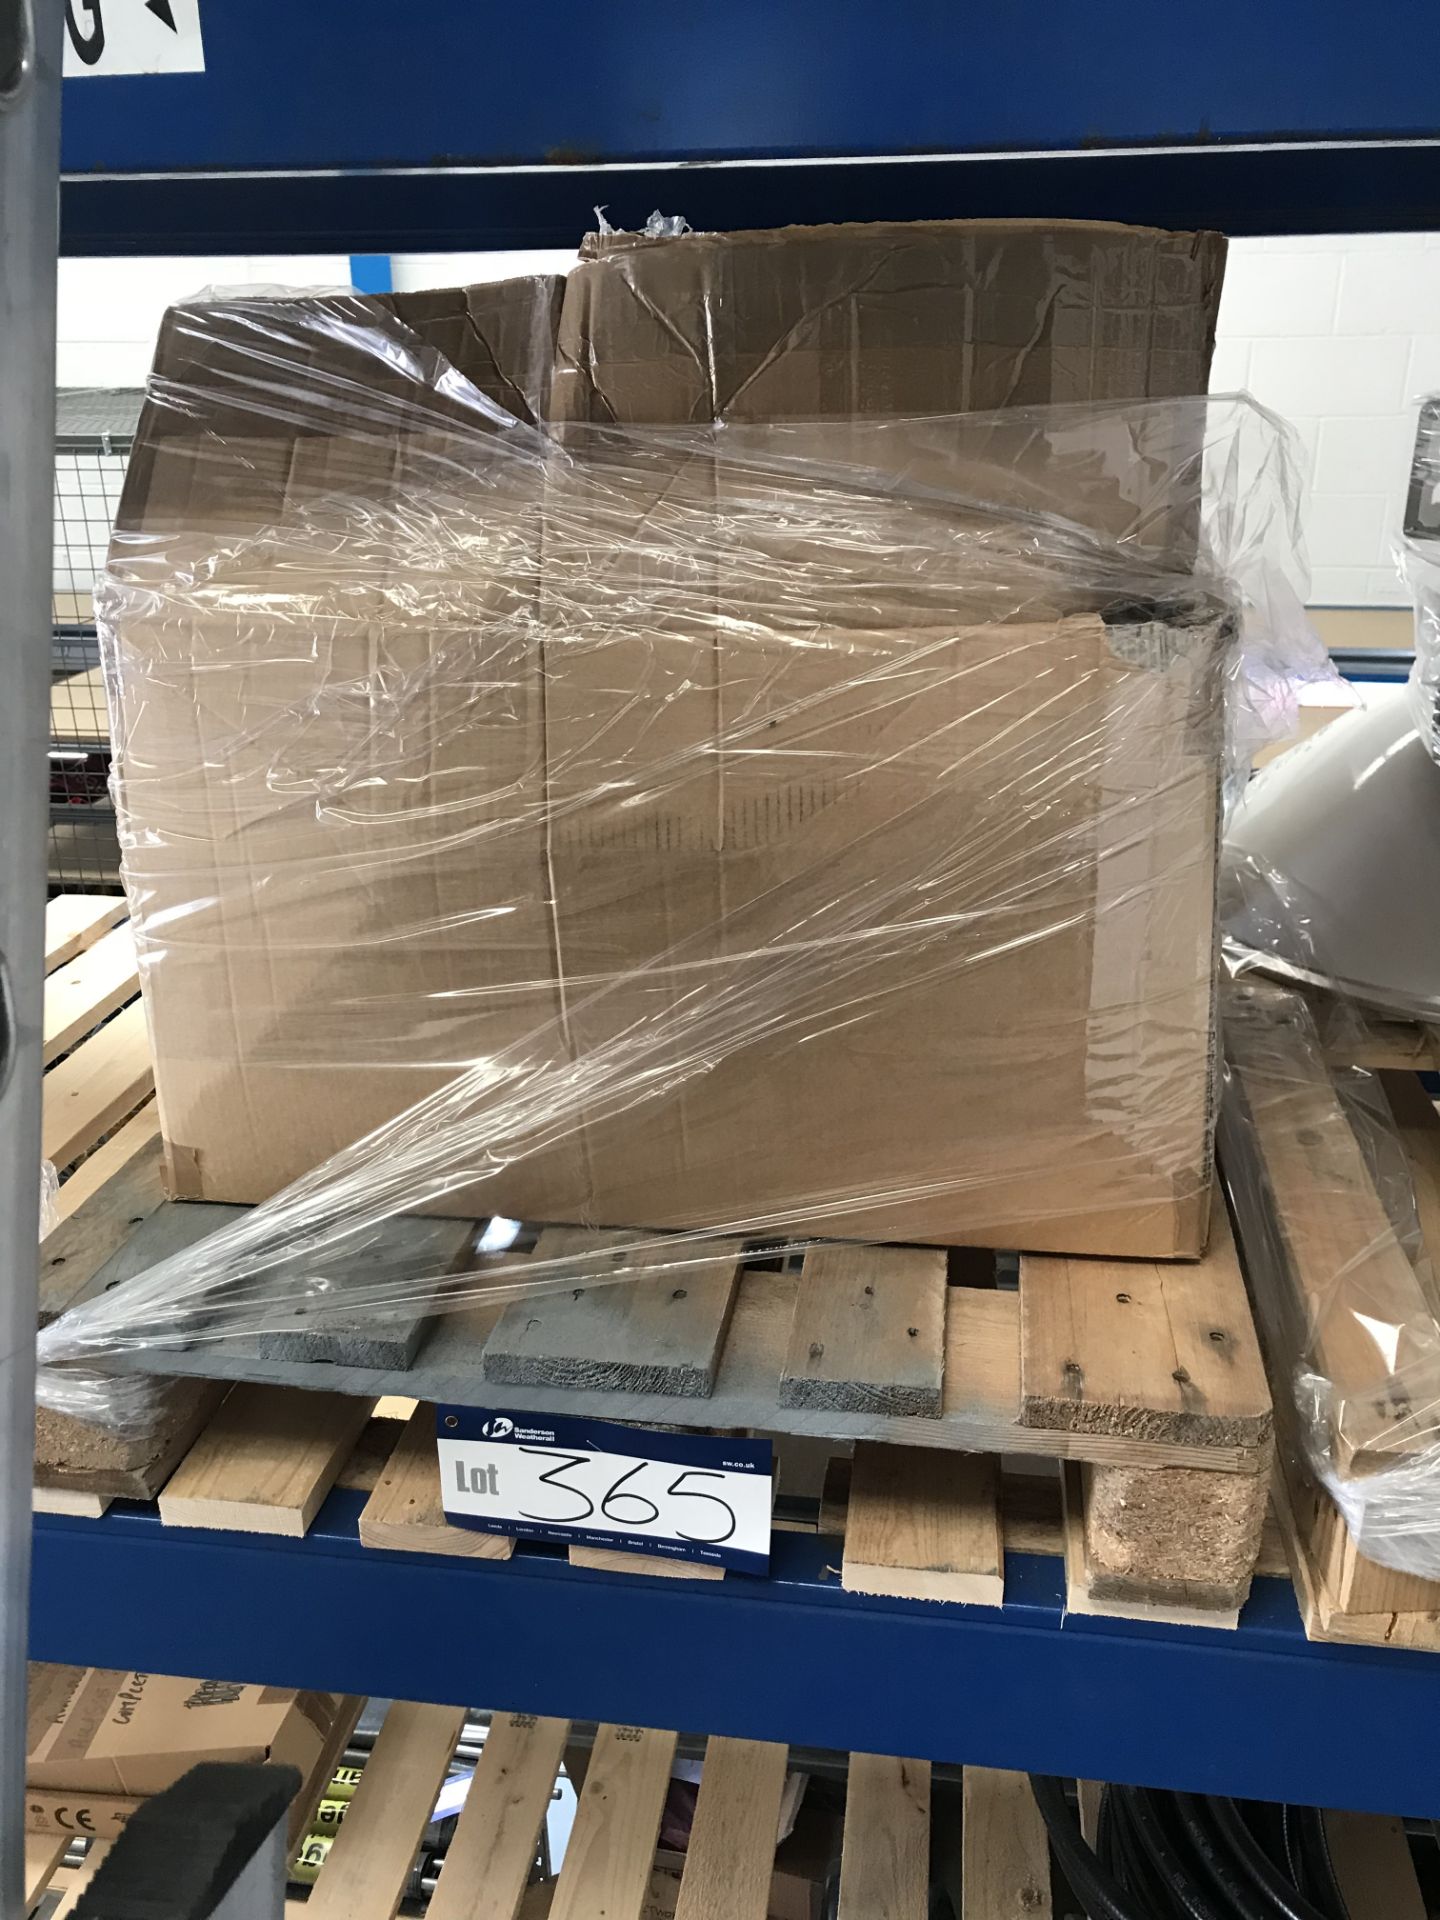 Pallet containing Large Quantity of Assorted Telecoms Cabling in 2 boxes